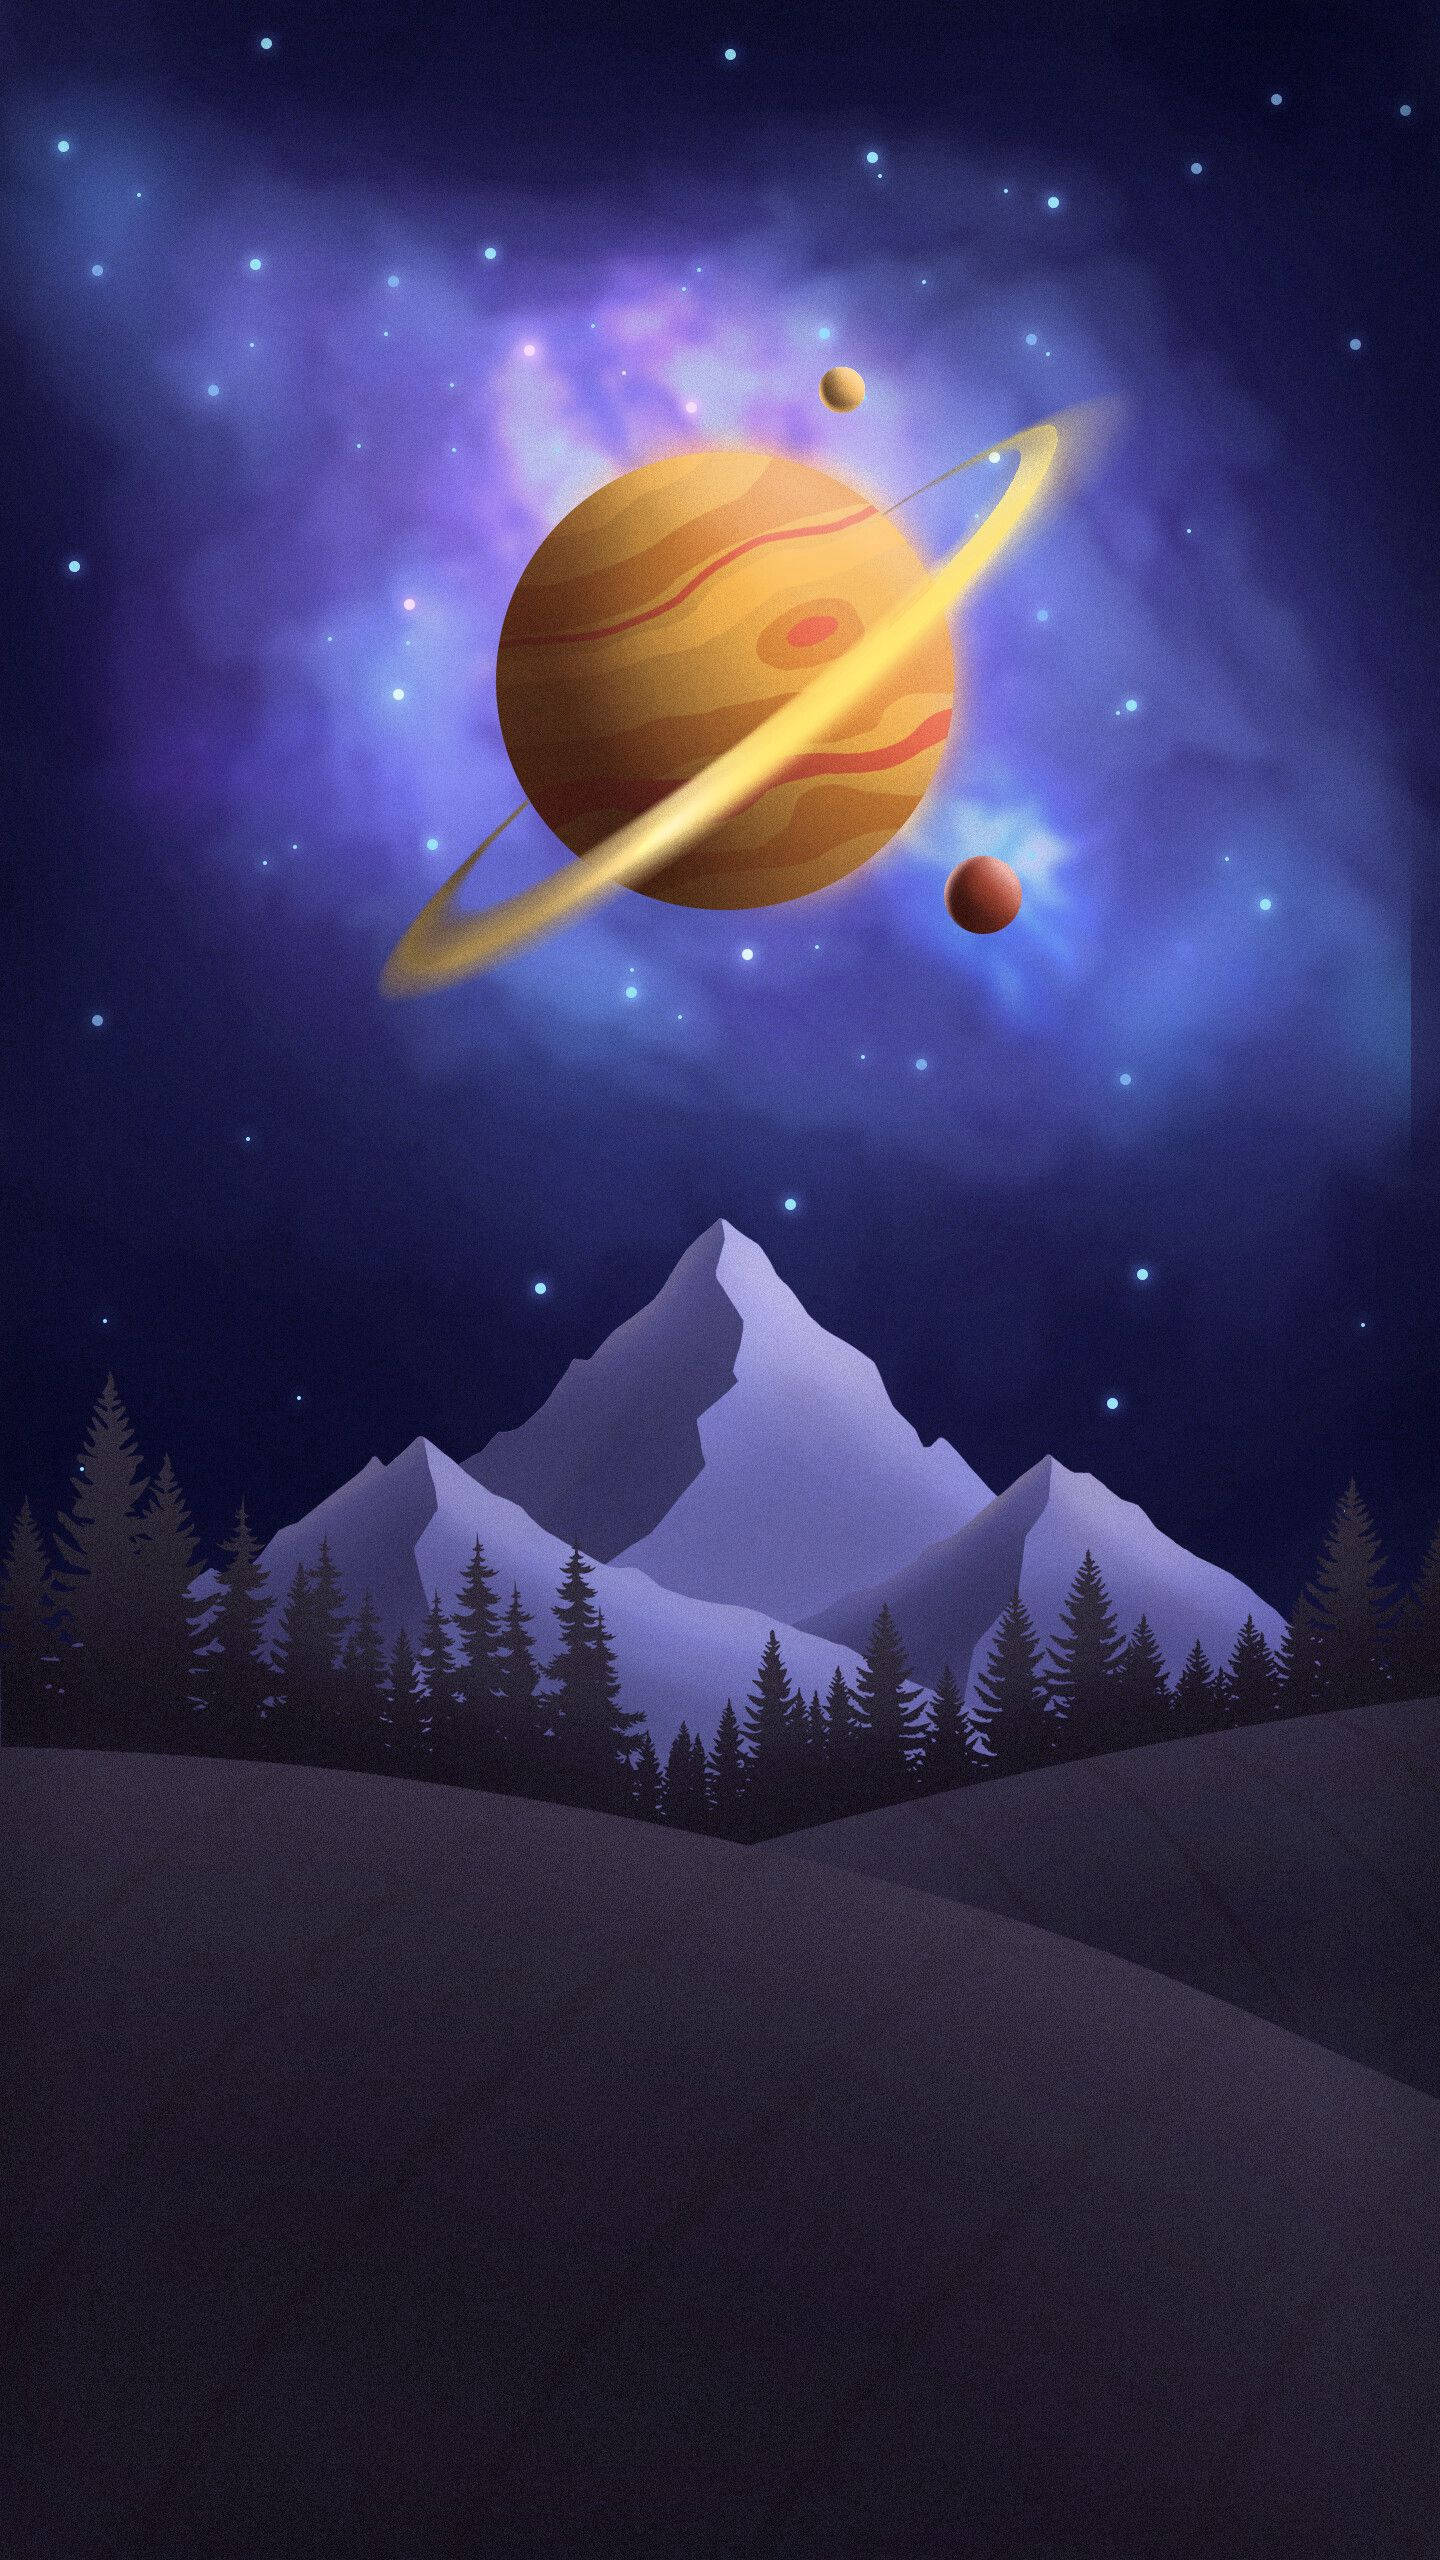 IPhone wallpaper of a planet in the night sky - Saturn